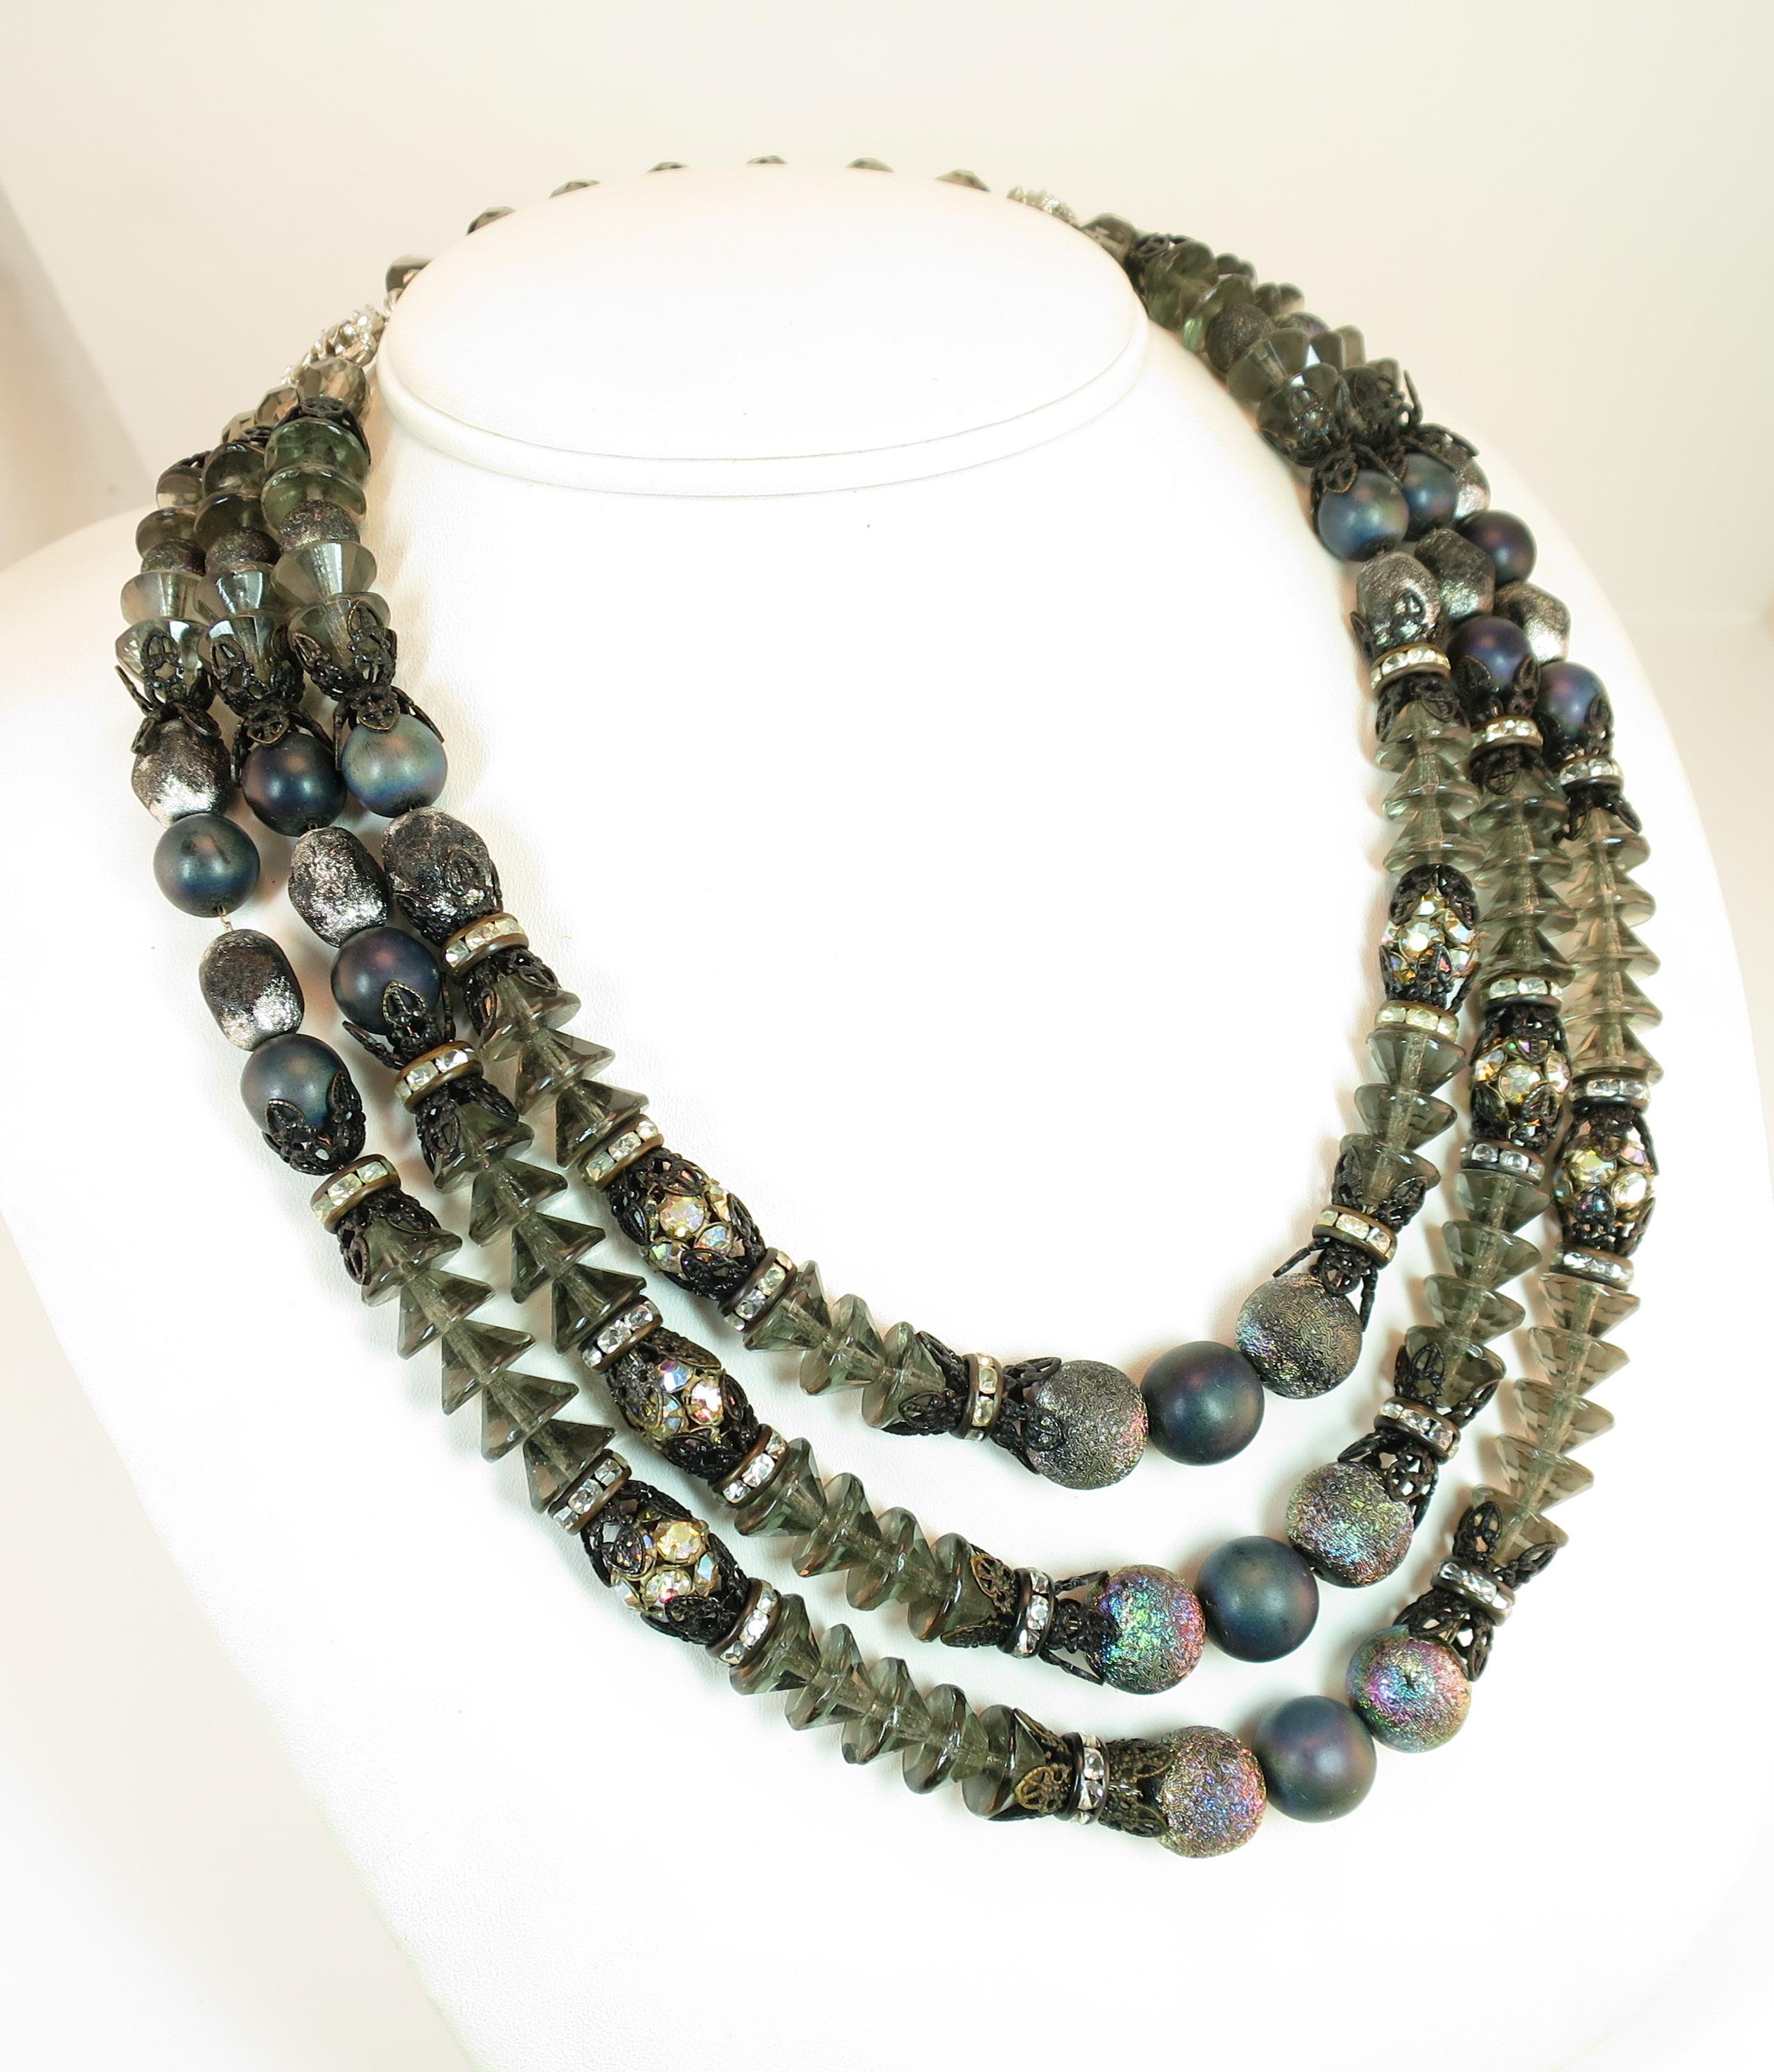 Offered here is a 1950s Hobé Mid-Century parure consisting of a three-strand draping necklace, coil memory bracelet, and clip-back earrings. All pieces are created from combinations of round composite beads in gray-purple and iridescent hues, bicone